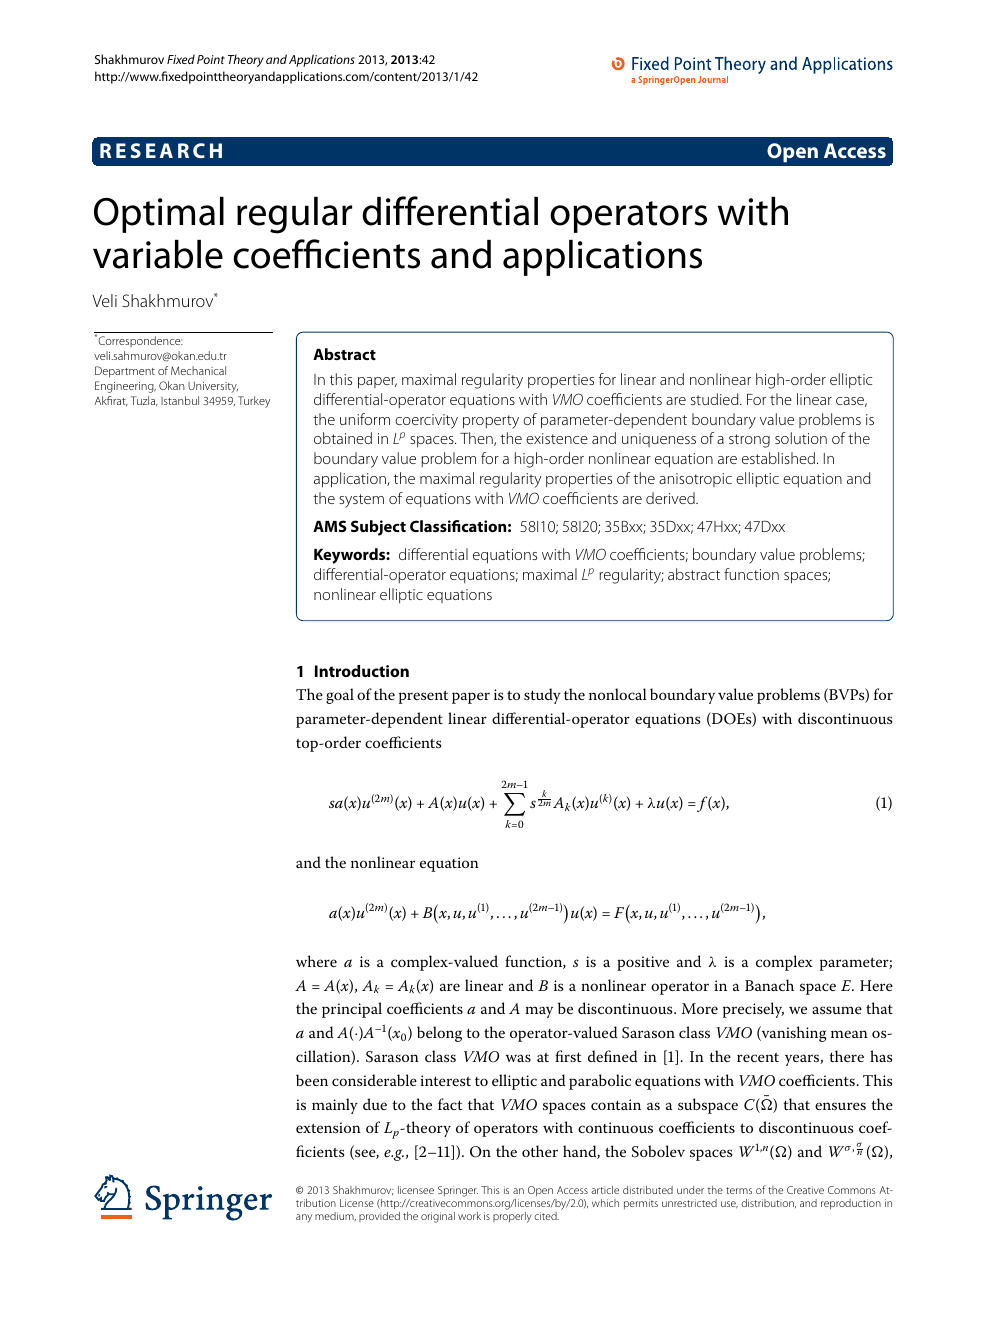 Optimal Regular Differential Operators With Variable Coefficients And Applications Topic Of Research Paper In Mathematics Download Scholarly Article Pdf And Read For Free On Cyberleninka Open Science Hub